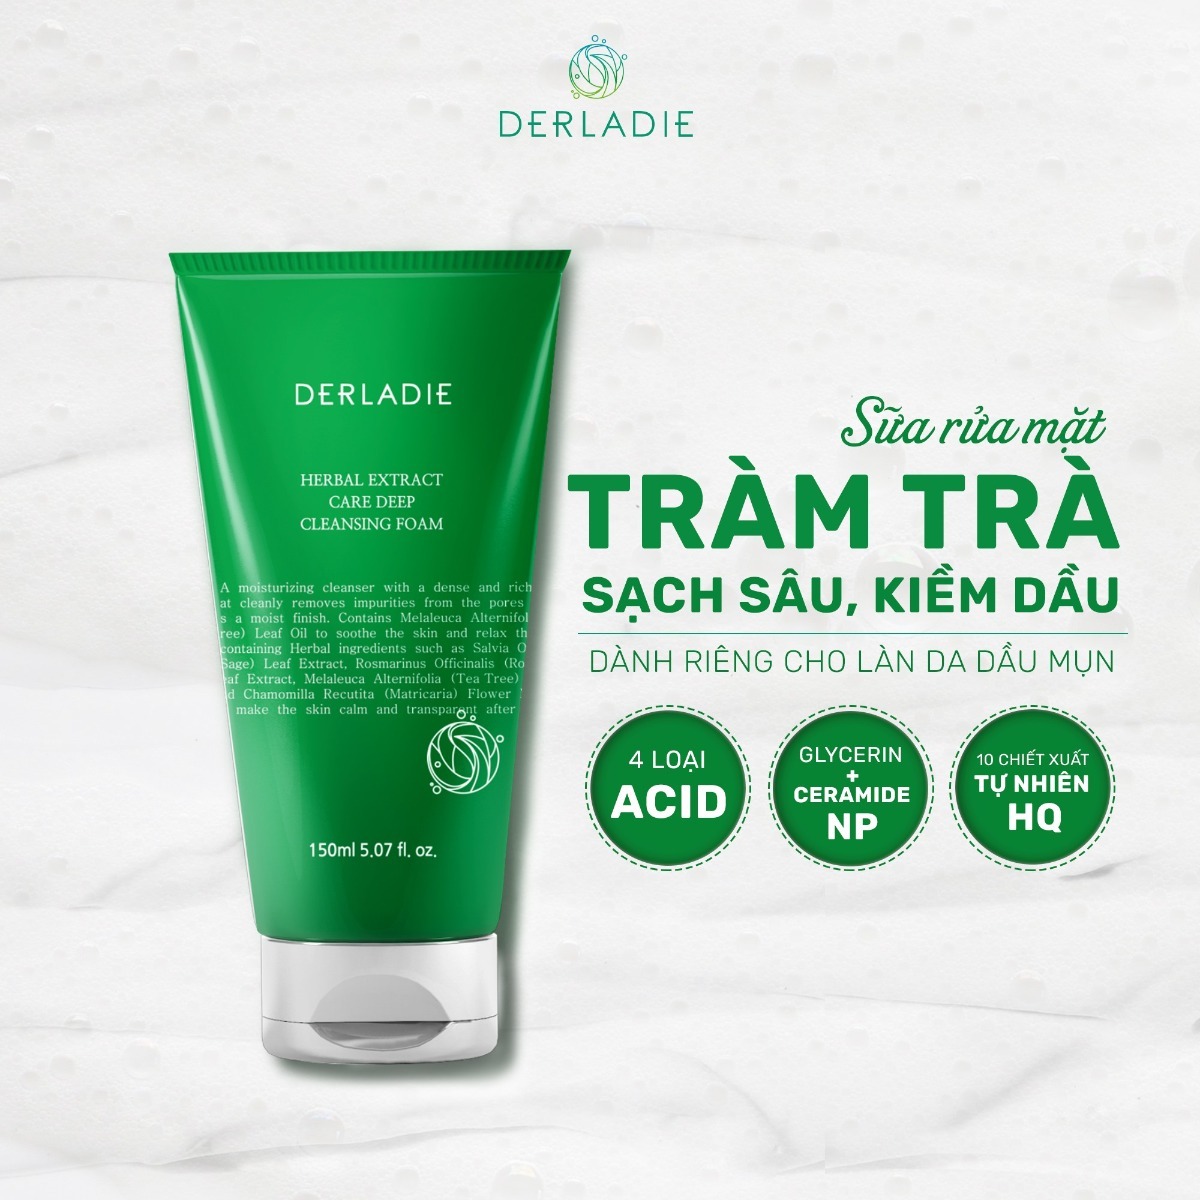 Herbal Extract Care Deep Cleansing Foam2